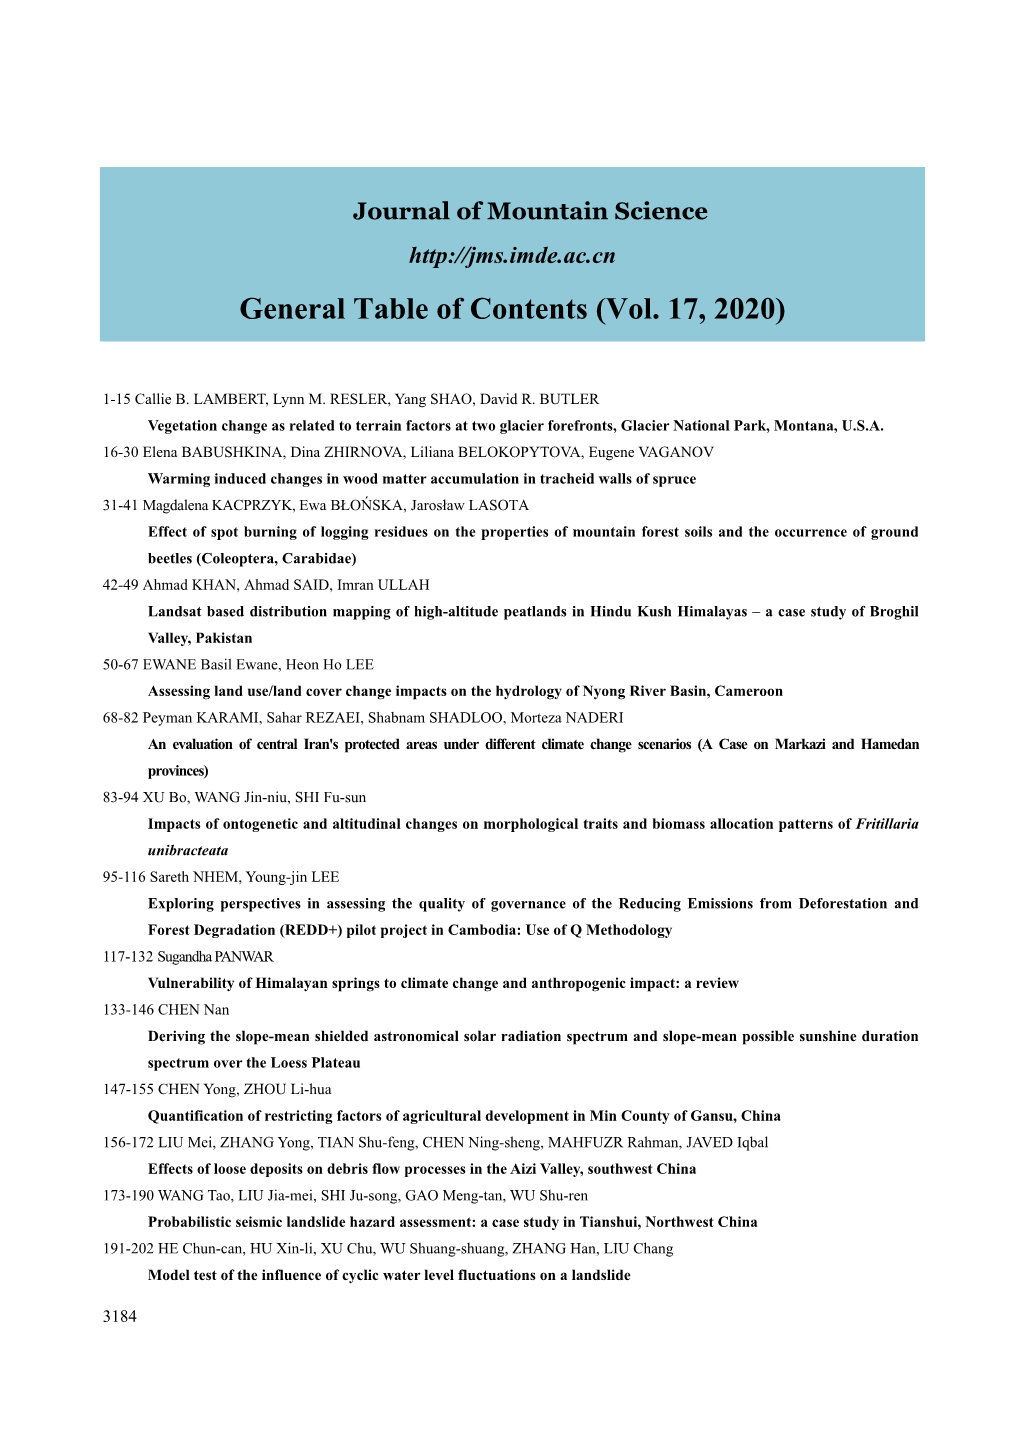 General Table of Contents (Vol. 17, 2020)